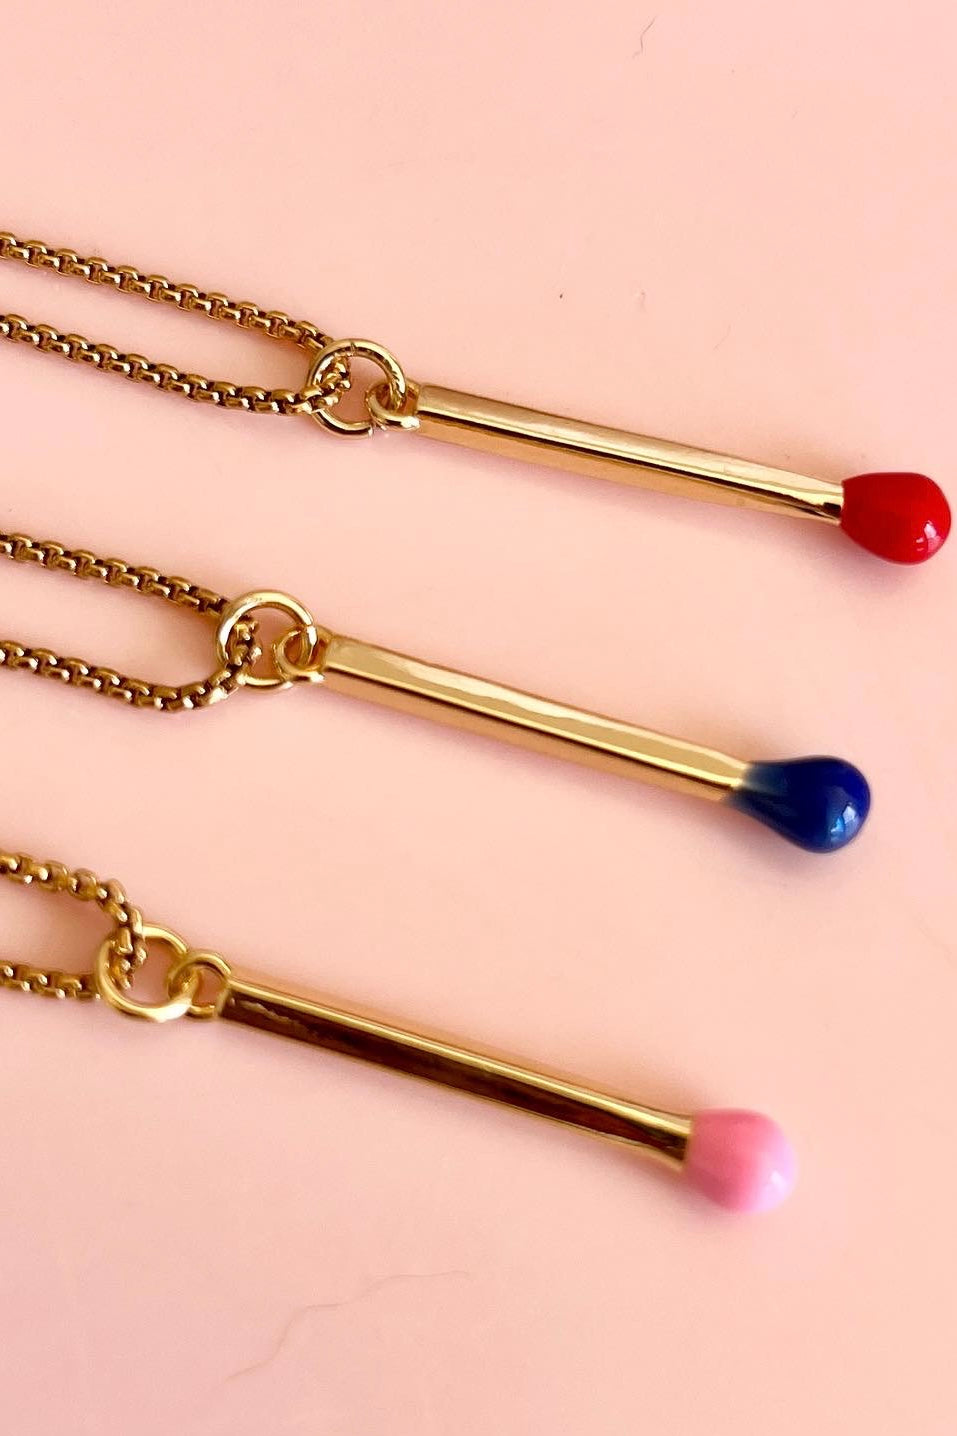 Penny Foggo - Matchstick Necklace - Pink, Red or Blue